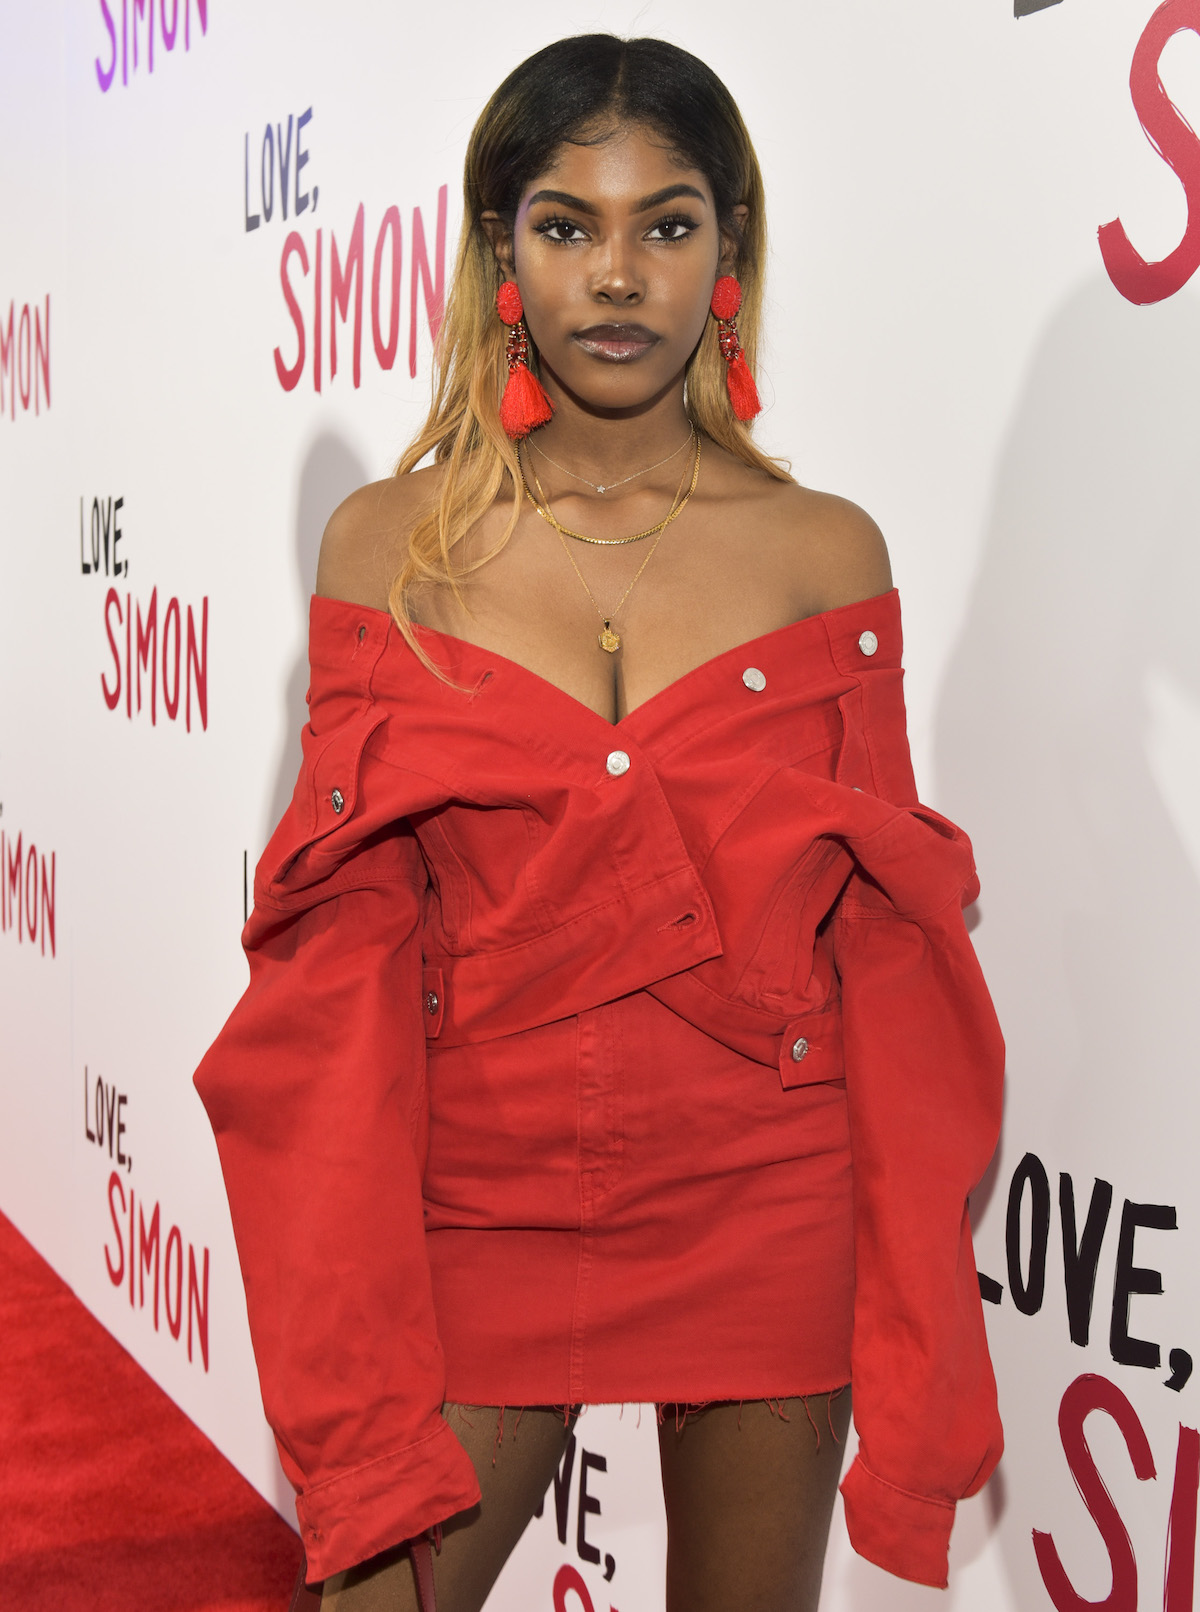 Diamond white wears an off-shoulder red dress at an event.